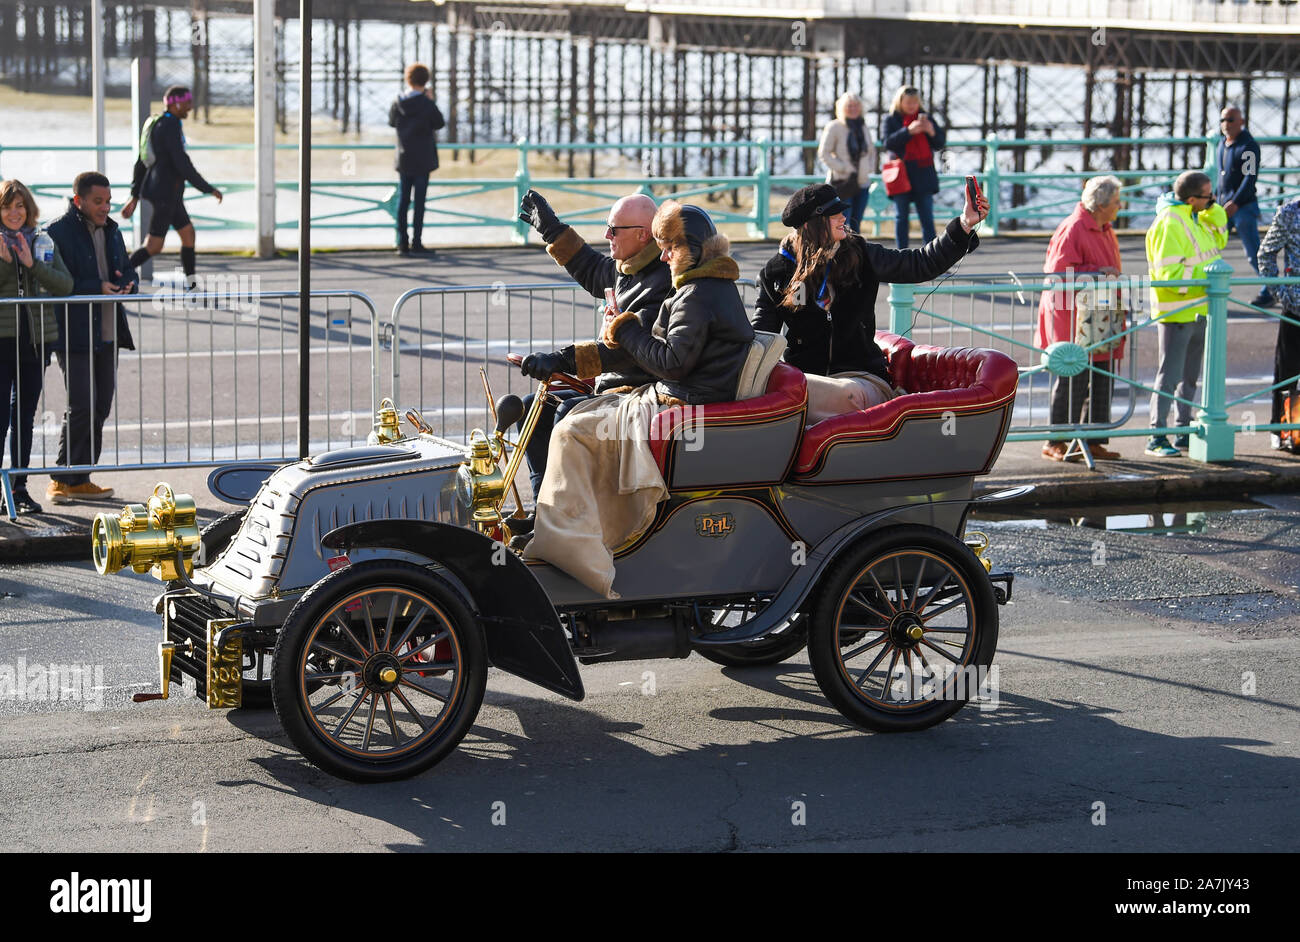 Brighton UK 3rd November 2019 - Time for a selfie as early arrivals near the finish of the Bonhams London to Brighton Veteran Car Run. Over 400 pre-1905 cars set off from Hyde Park London early this morning and finish at Brighton's Madeira Drive on the seafront : Credit Simon Dack / Alamy Live News Stock Photo